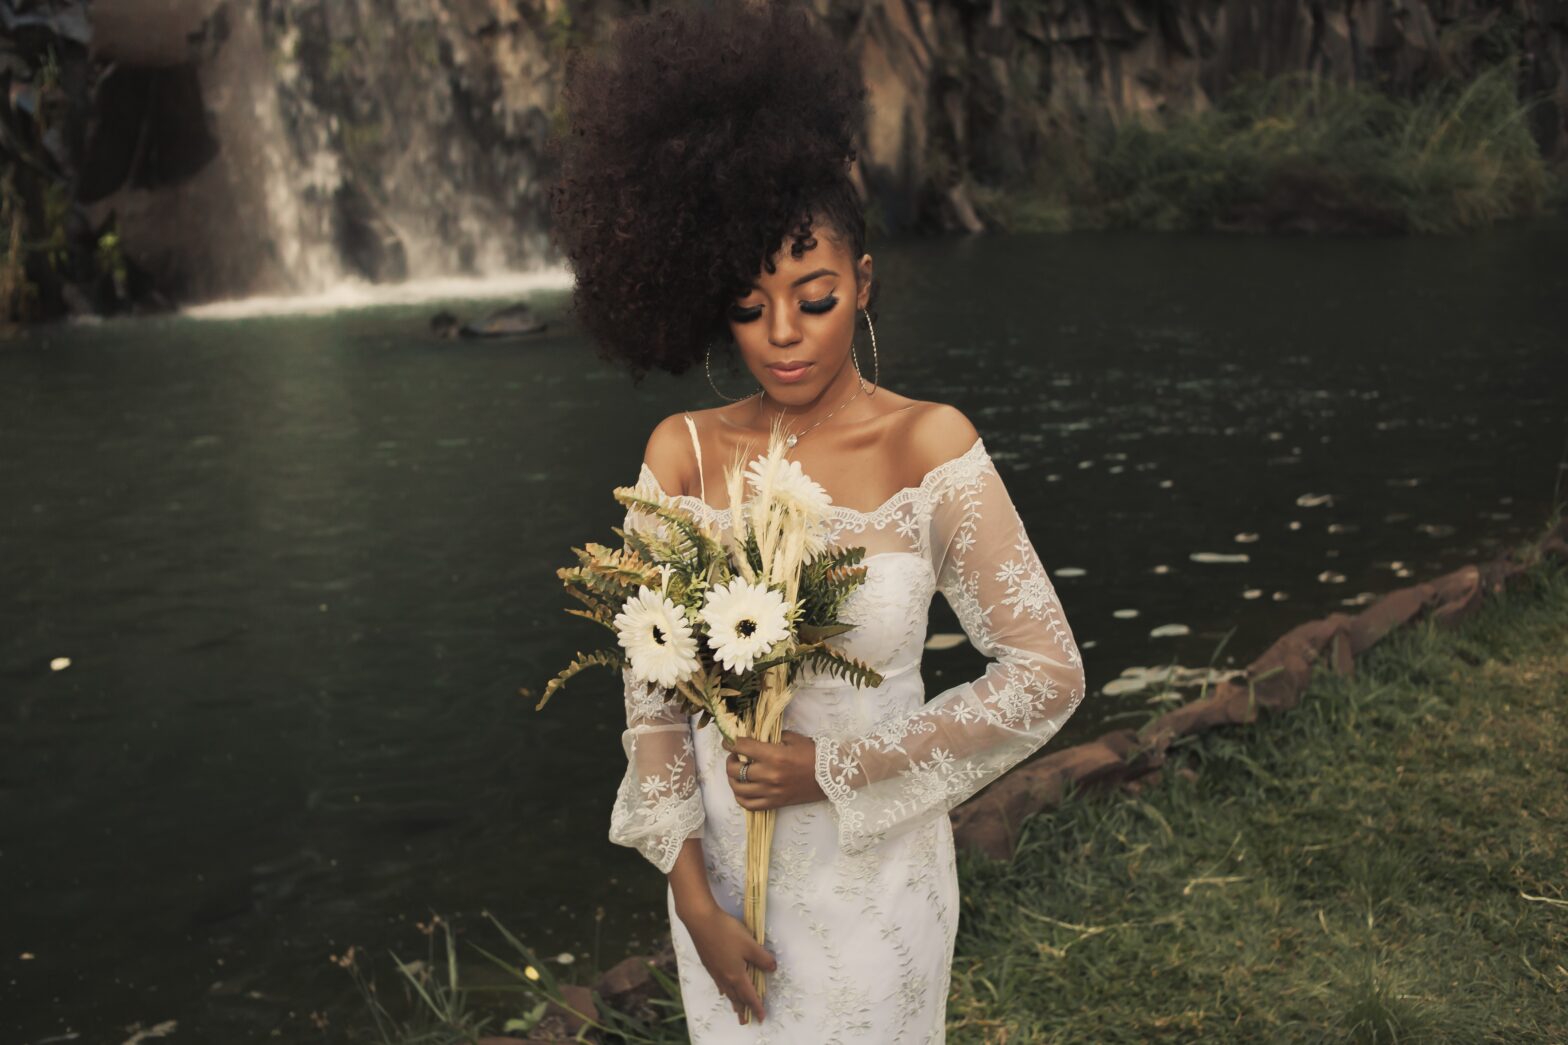 Black-woman-in-white-wedding-dress-holding-flowers-outdoors